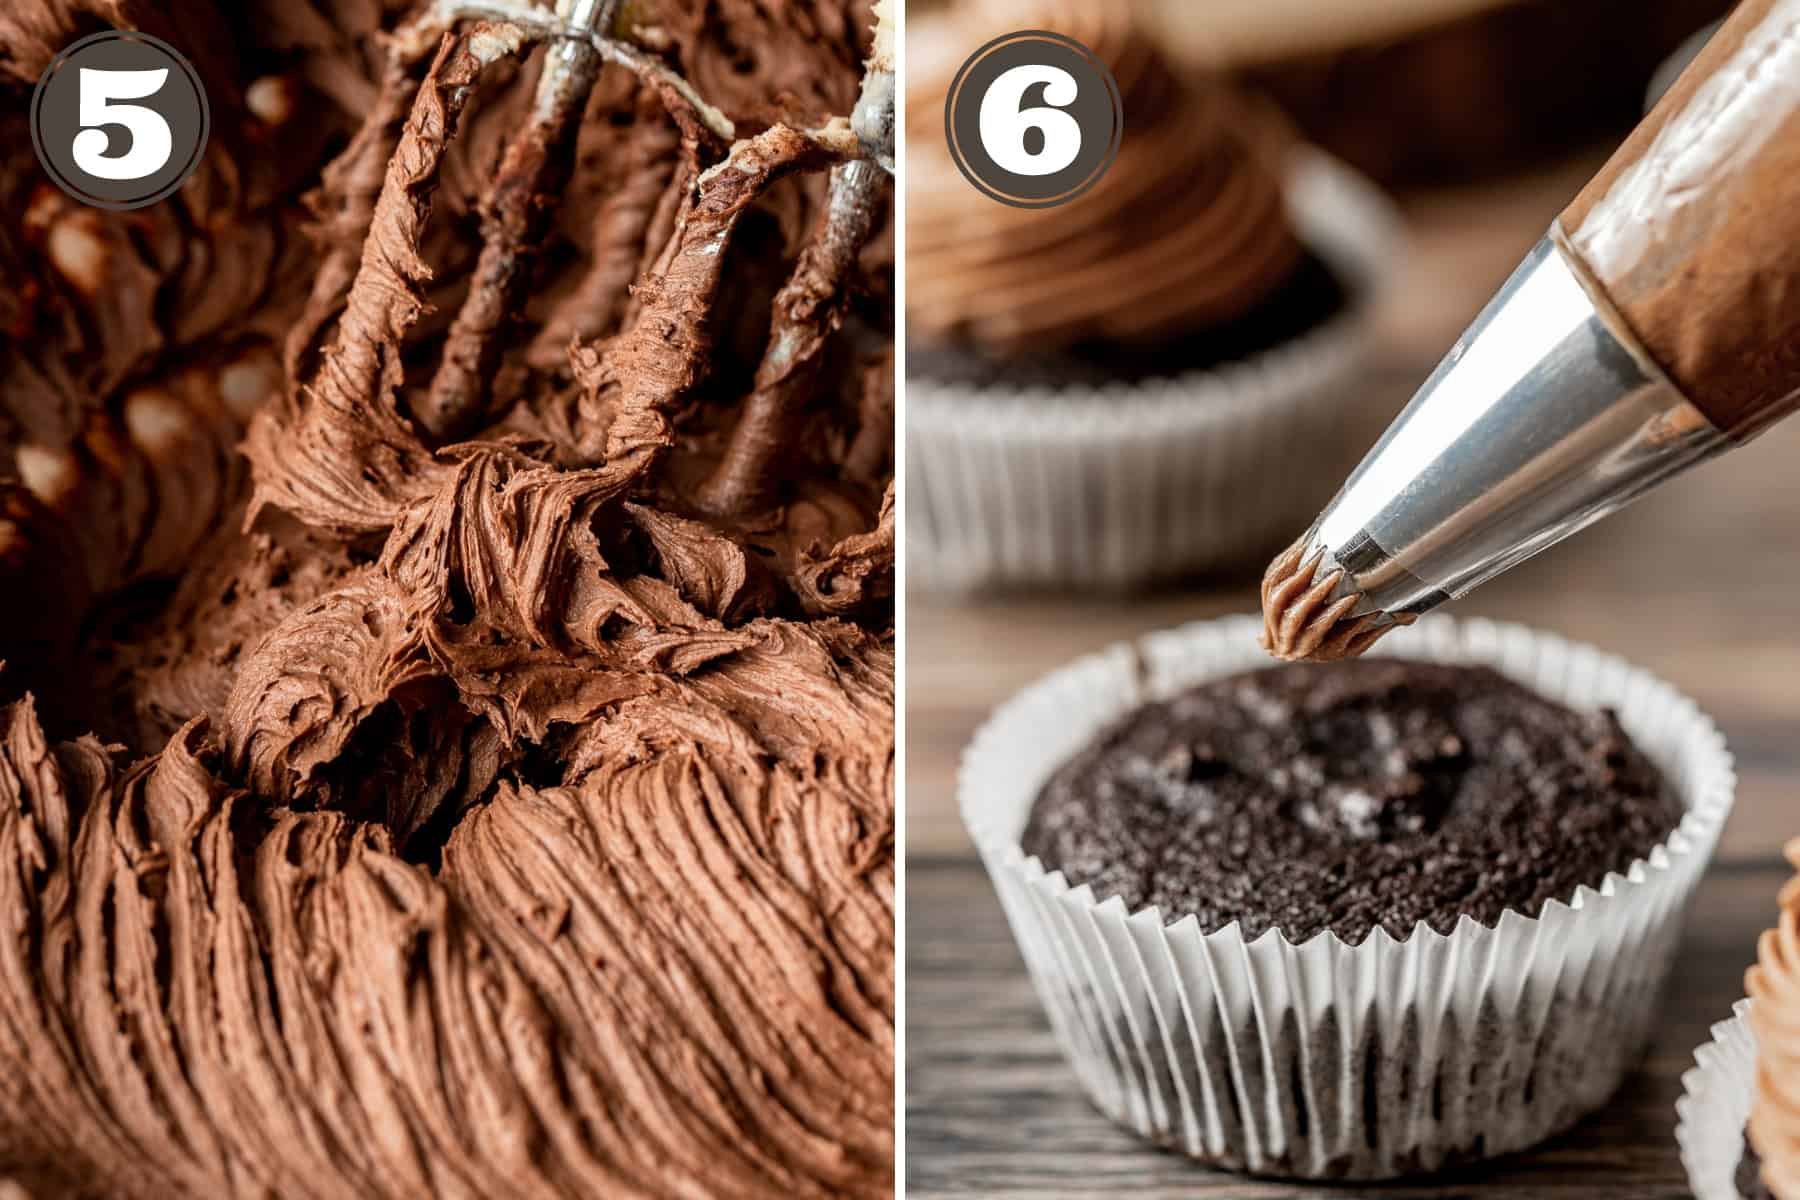 Side by side photos showing chocolate buttercream and frosting being piped on a chocolate cupcake.